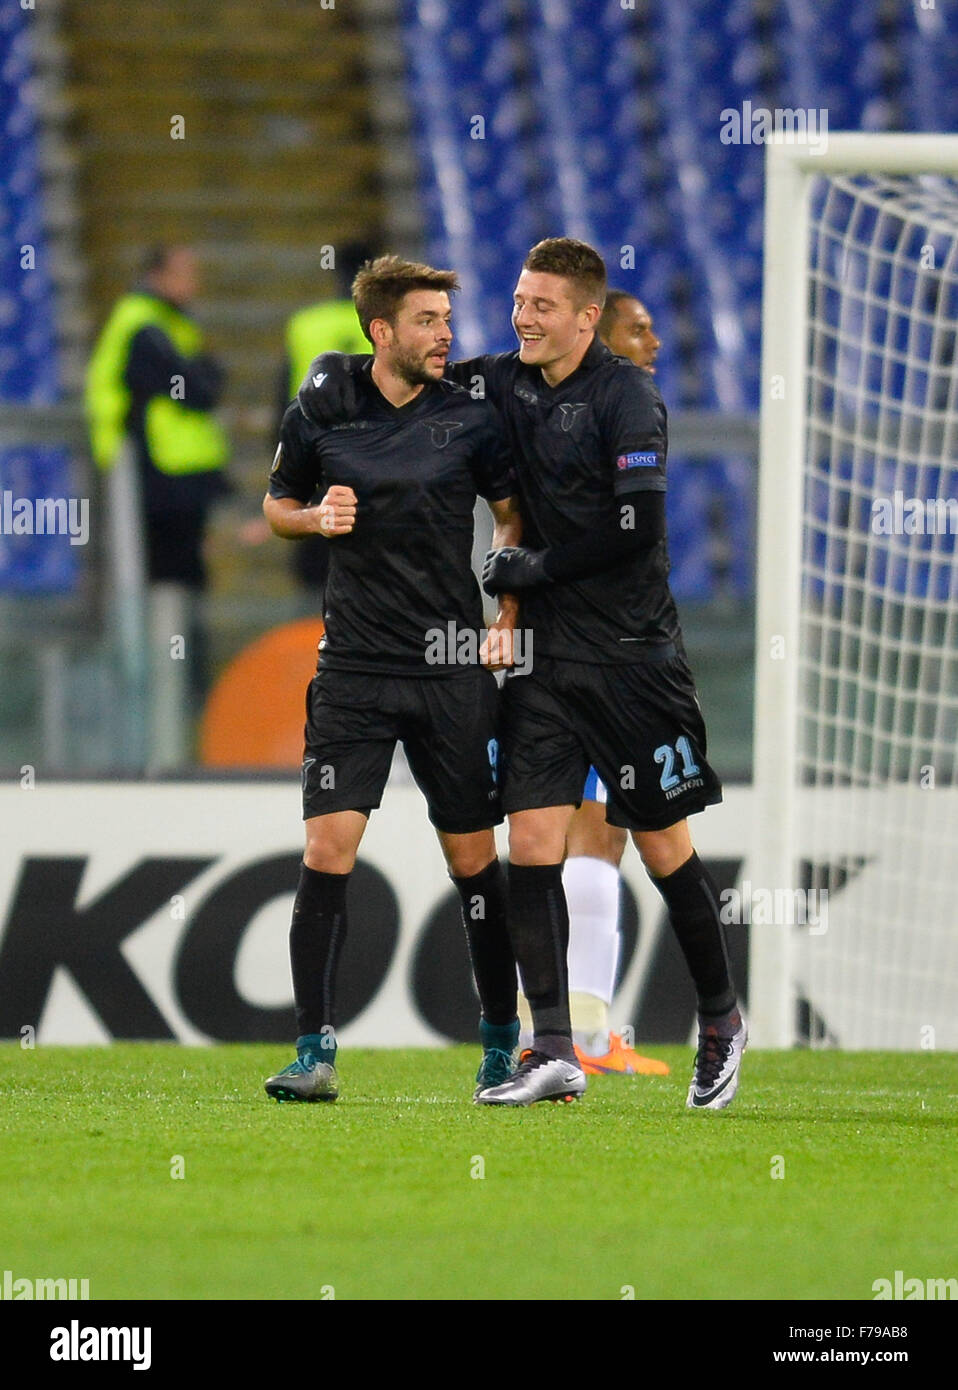 Rome, Italy. 26th November, 2015. Filip Djordjevic celebrates after scoring a goal 3-1 during the Europe League football match S.S. Lazio vs F.C. Dnipro at the Olympic Stadium in Rome, on november 26, 2015 Credit:  Silvia Lore'/Alamy Live News Stock Photo